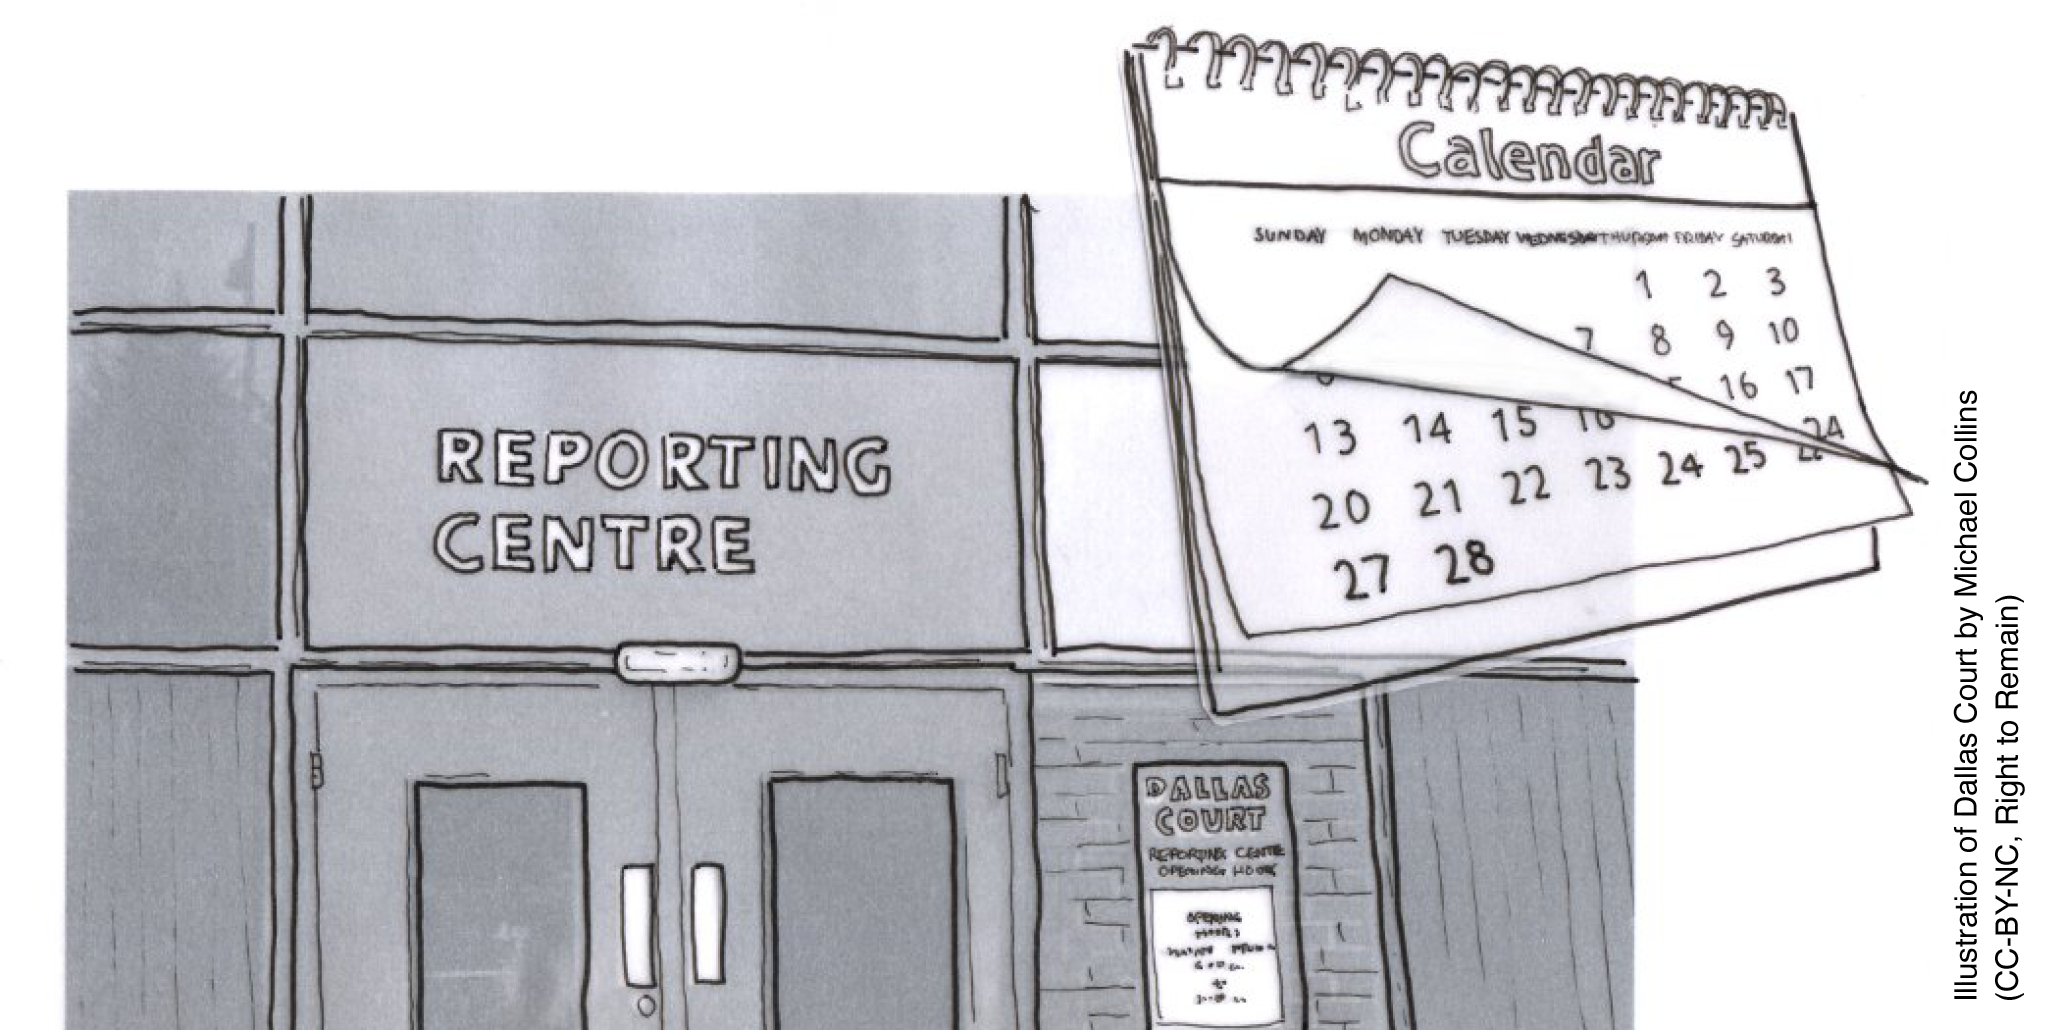 Greyscale line artwork of Dallas Court Reporting Centre and a calendar